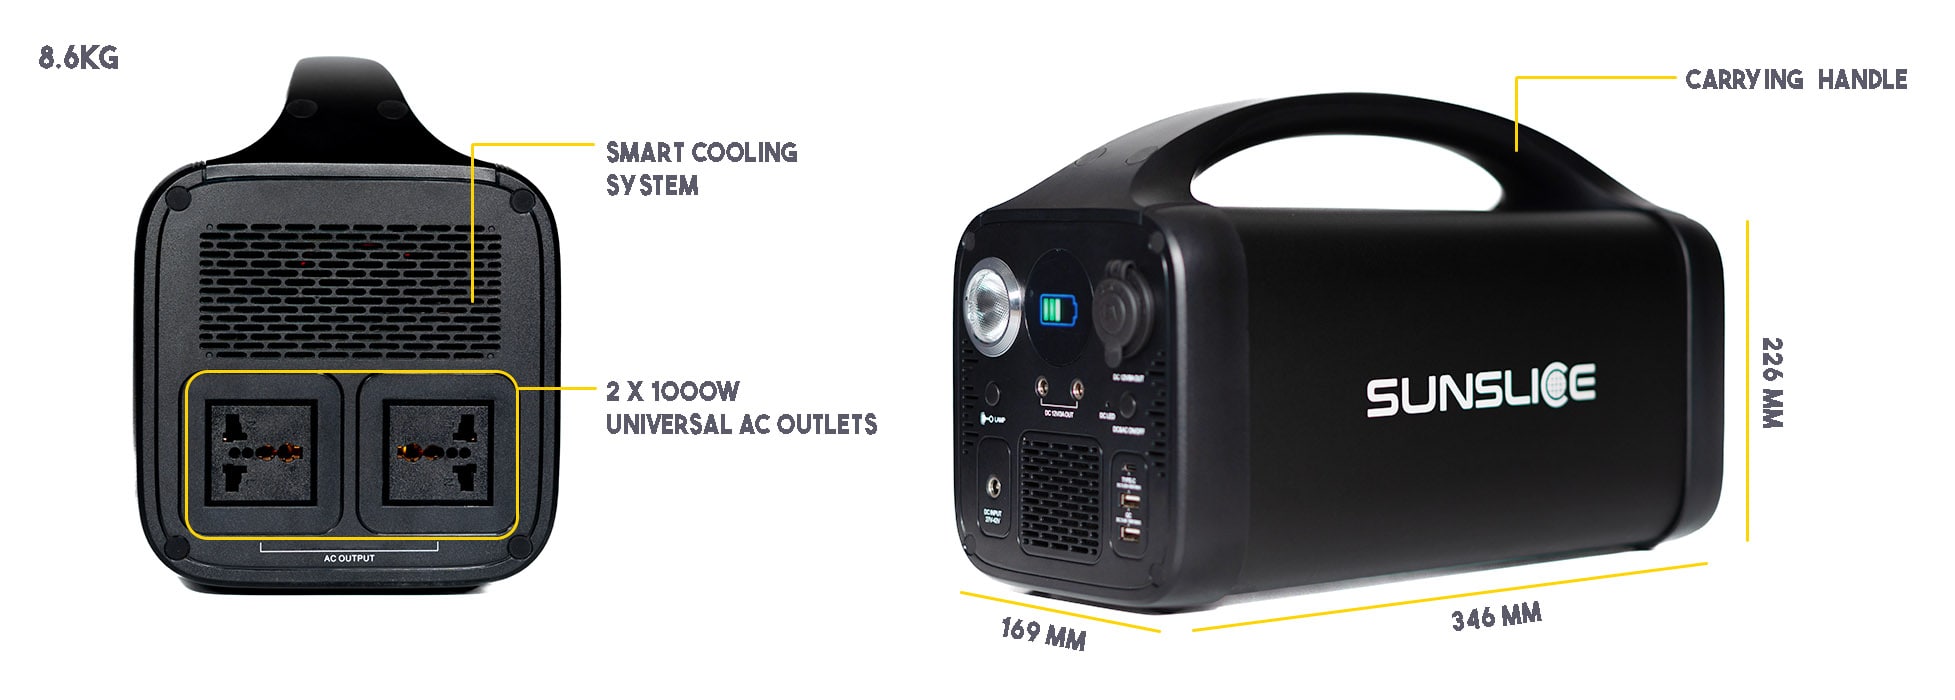 Solar generator Gravity 756 with a smart cooling system, 2x 1000W universal AC outlets. Size: 346mm, 226mm, 169mm